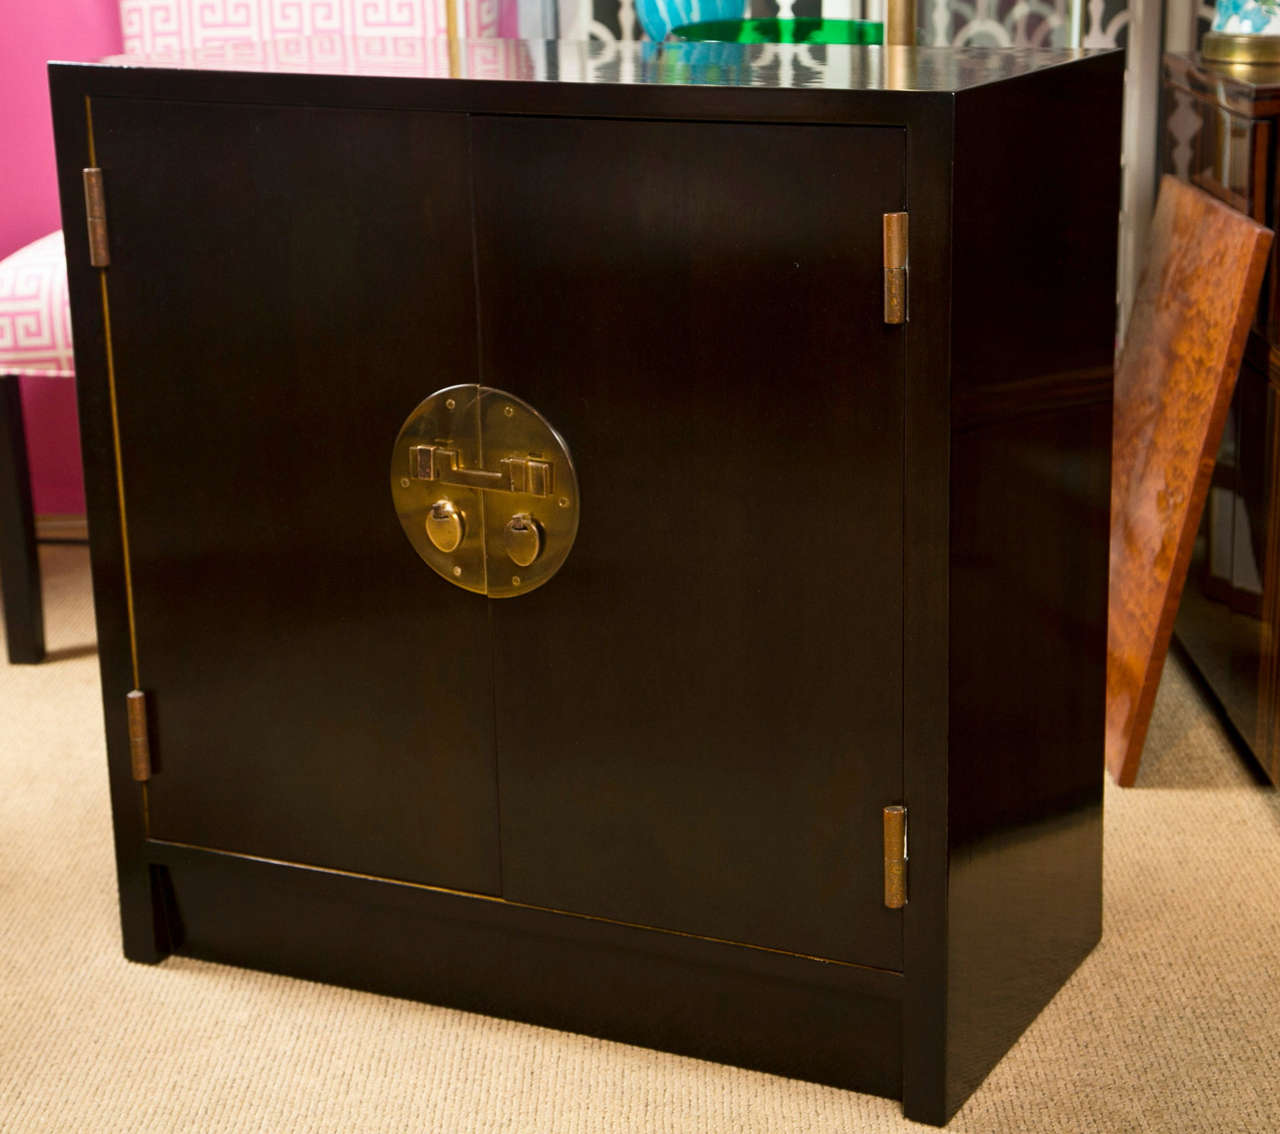 Classic two door Dunbar chest with brass Asian style hardware.
Deep chocolate finish.